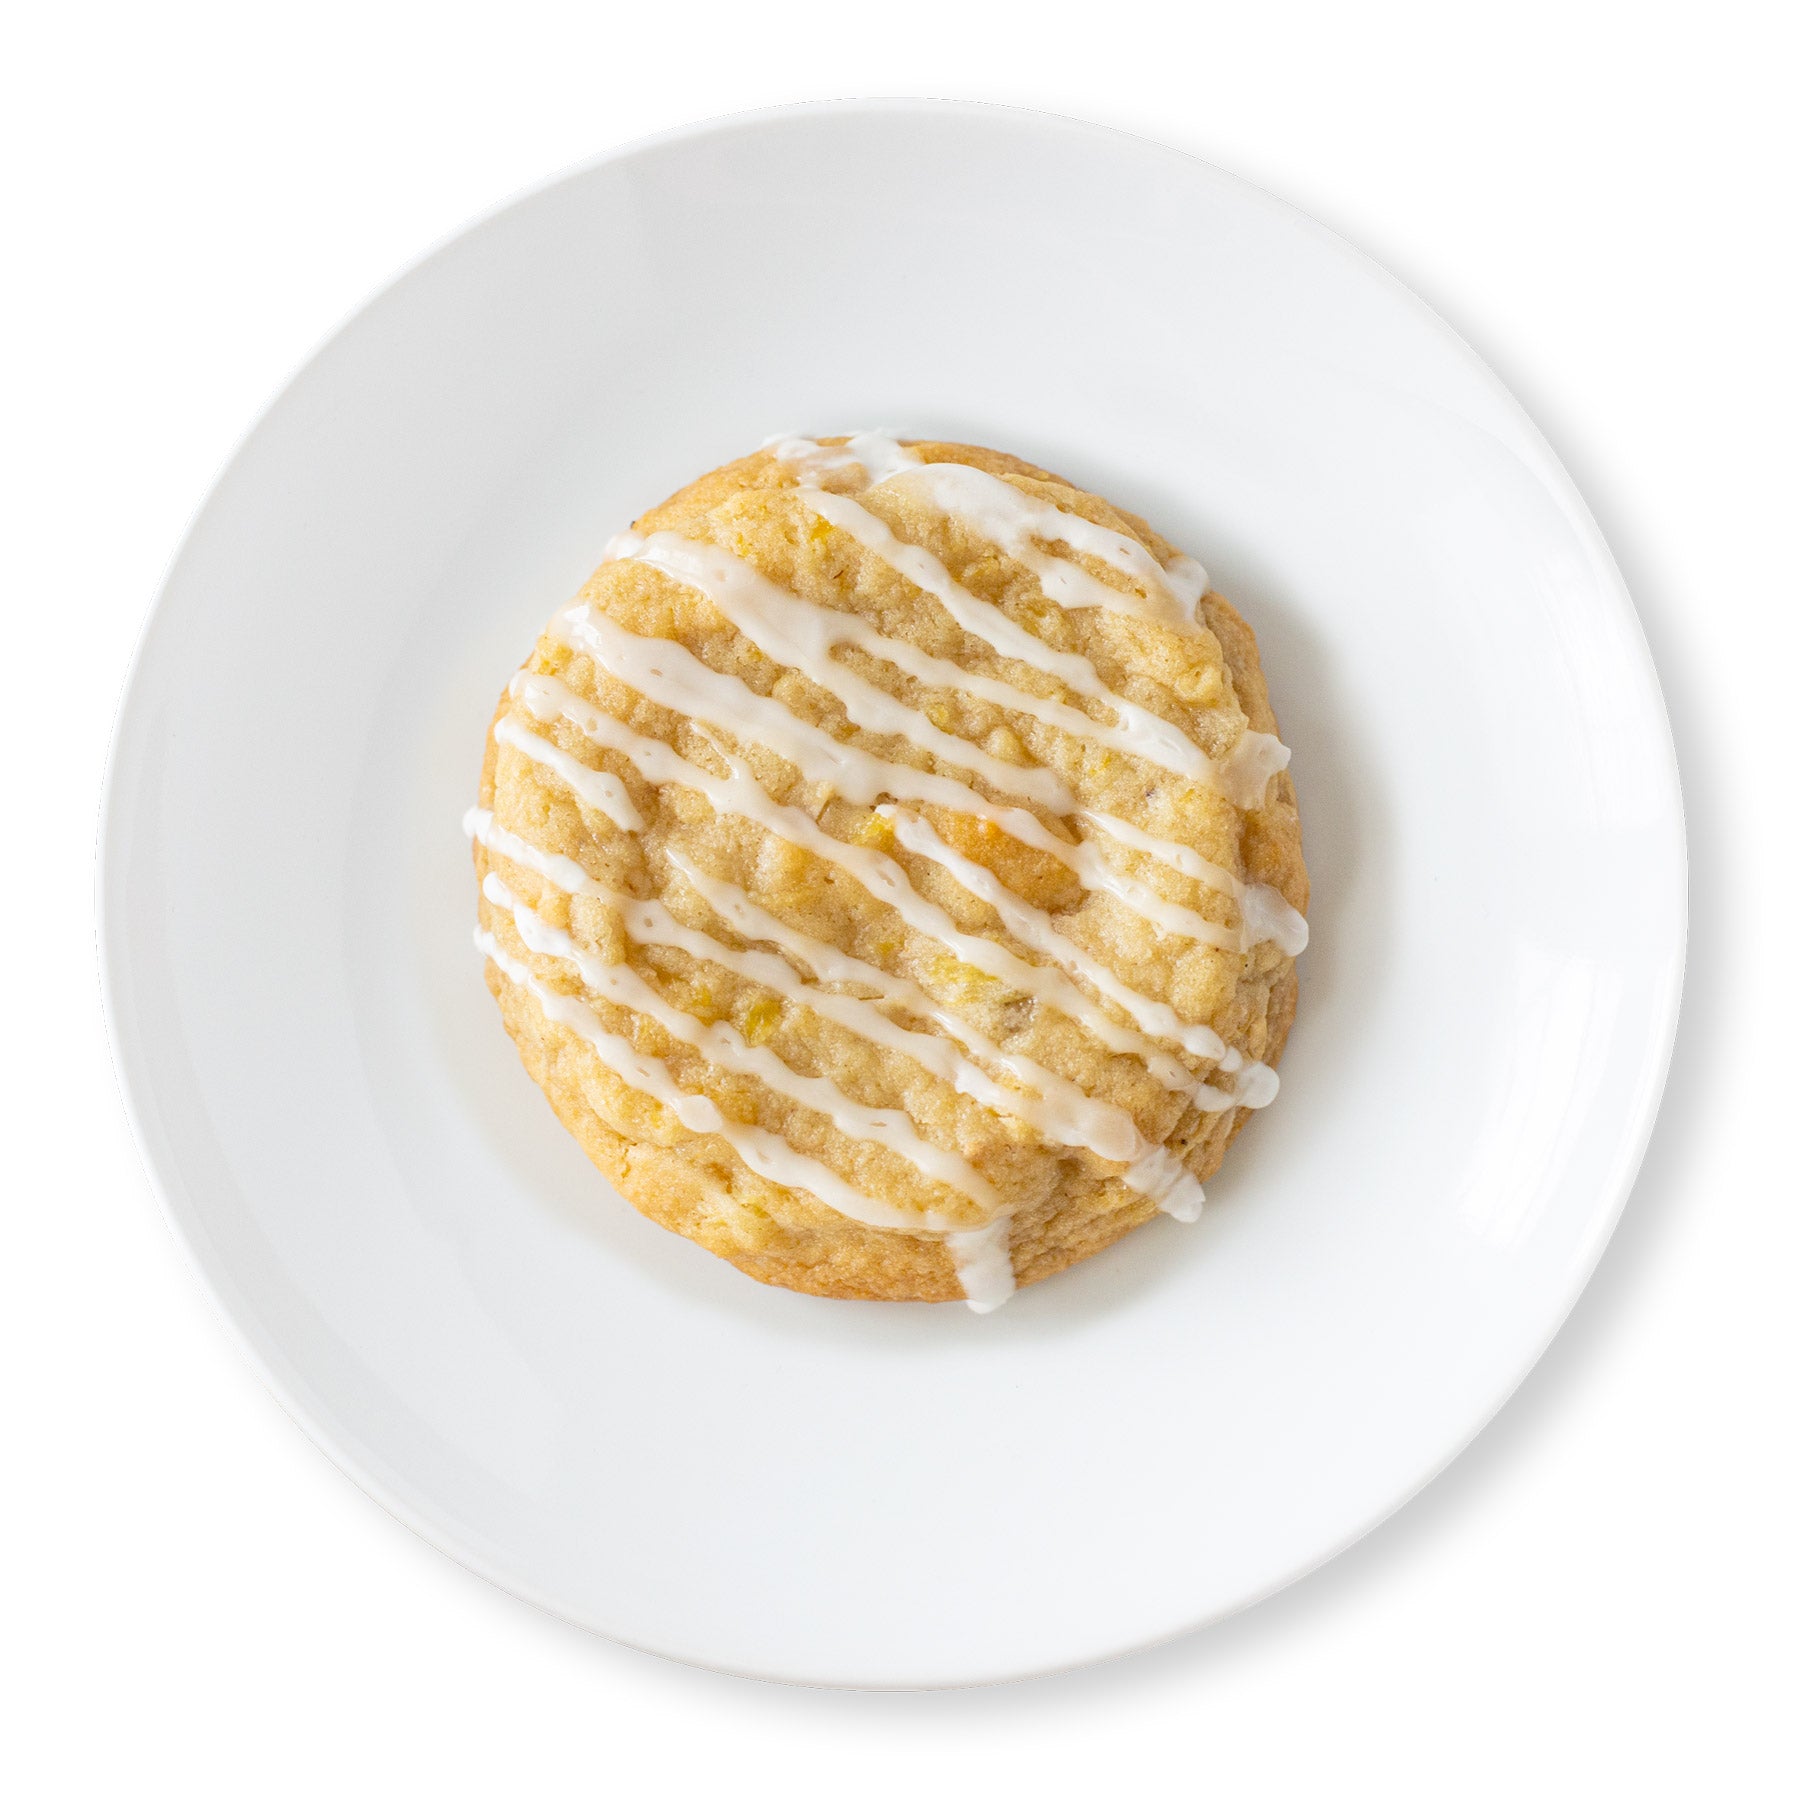 Pineapple coconut cookie with toasted coconut and pineapple chunks, topped with pineapple glaze.